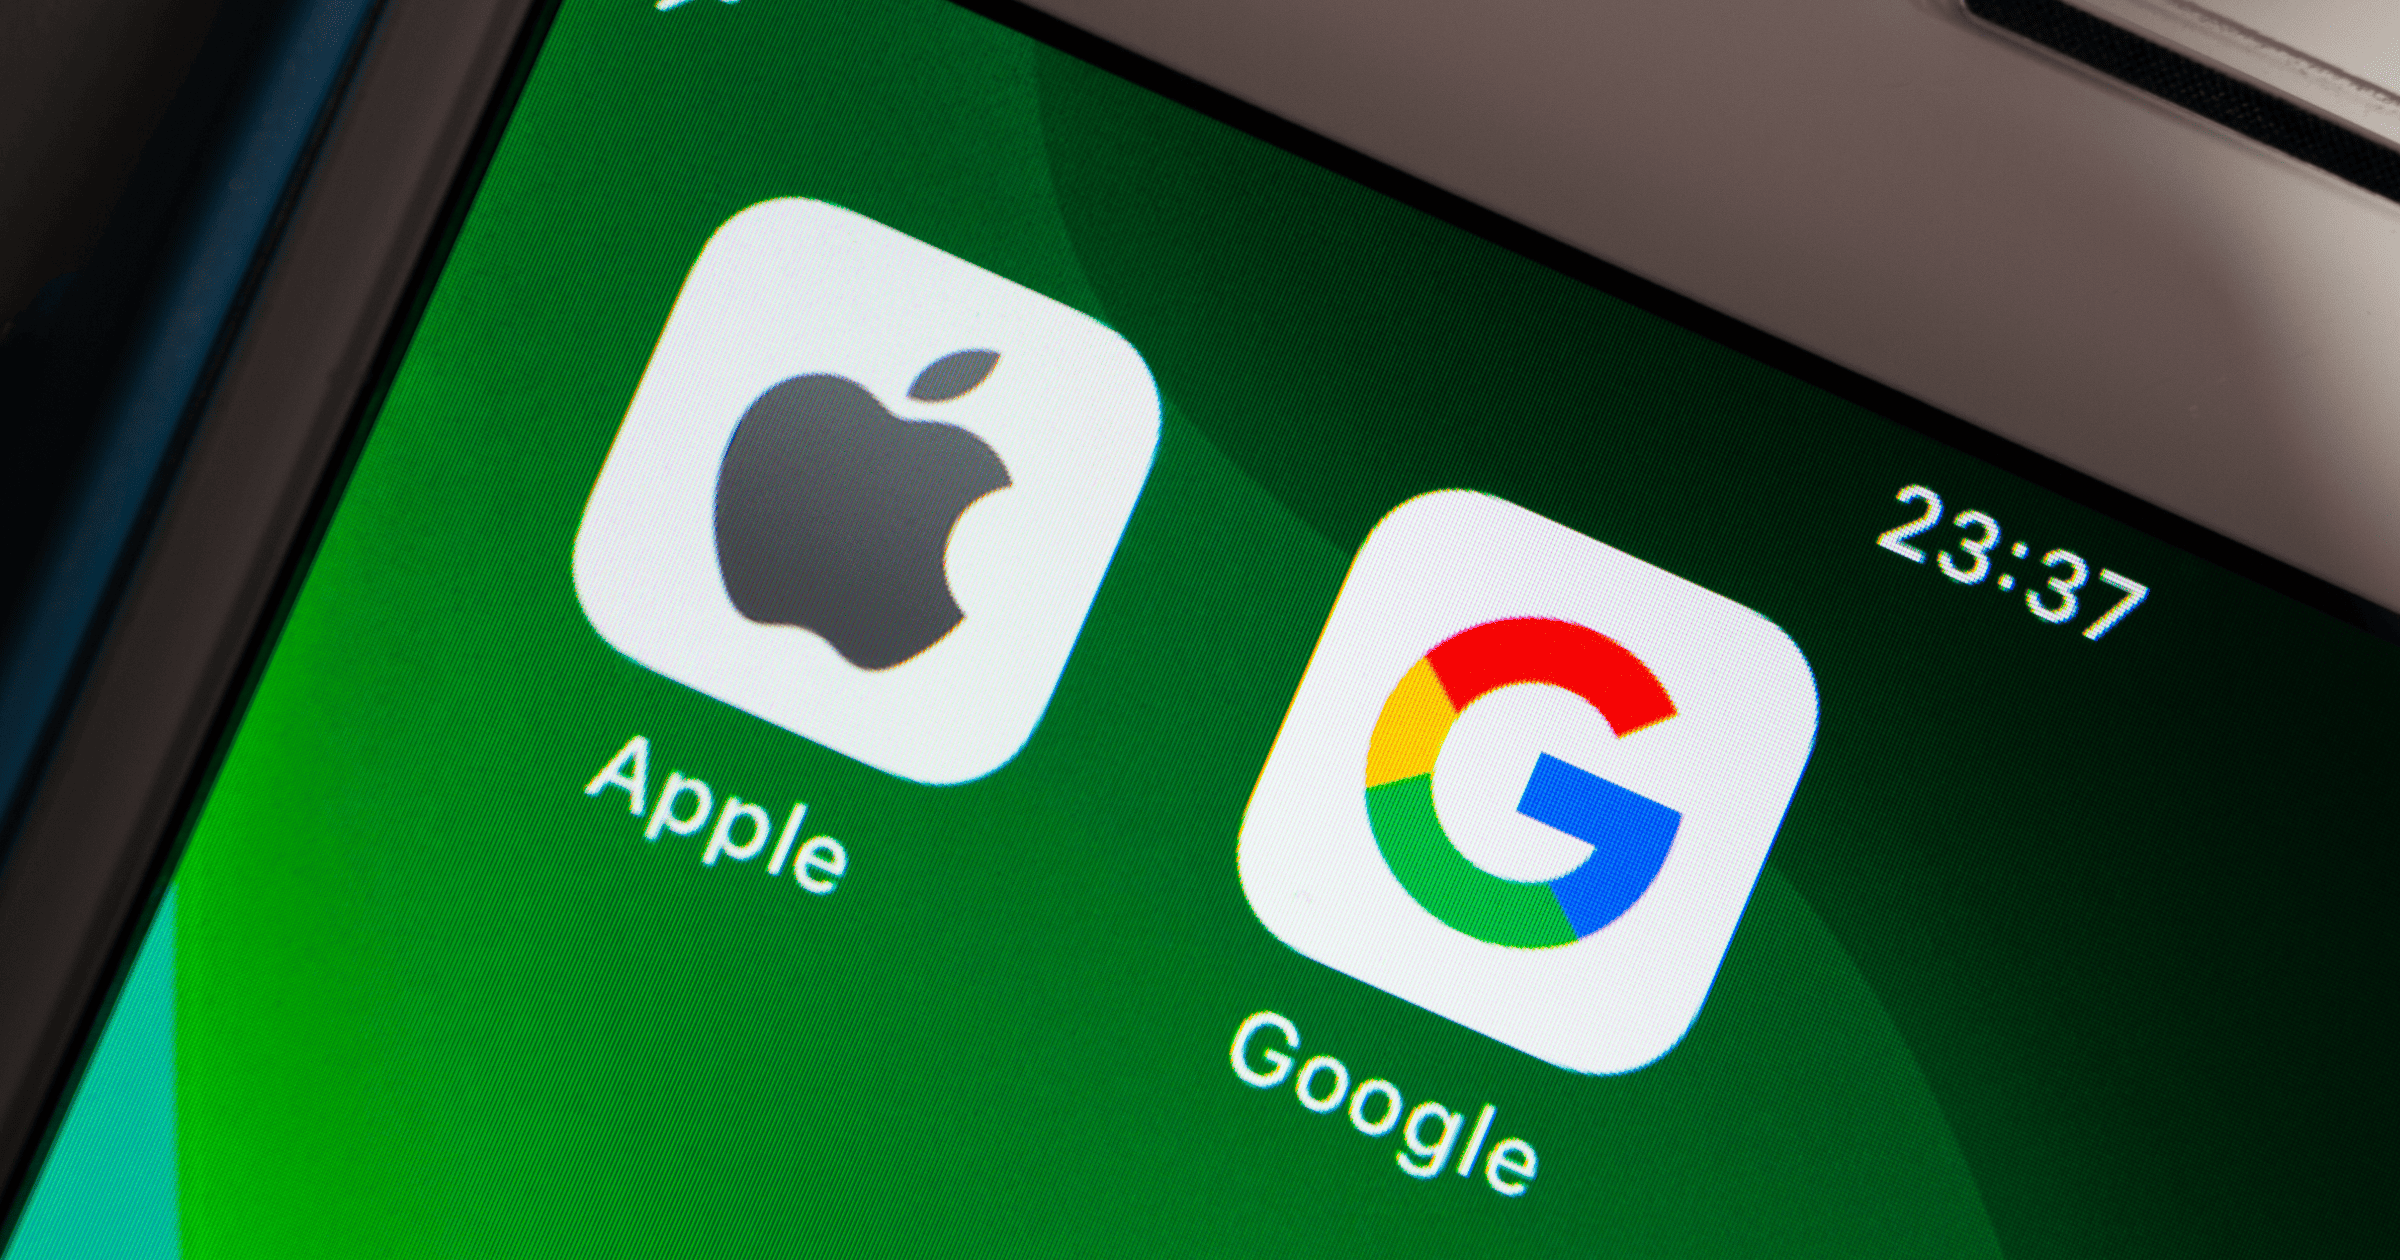 Class Action Lawsuit Alleges Google Pays Apple to Stay Out of Search